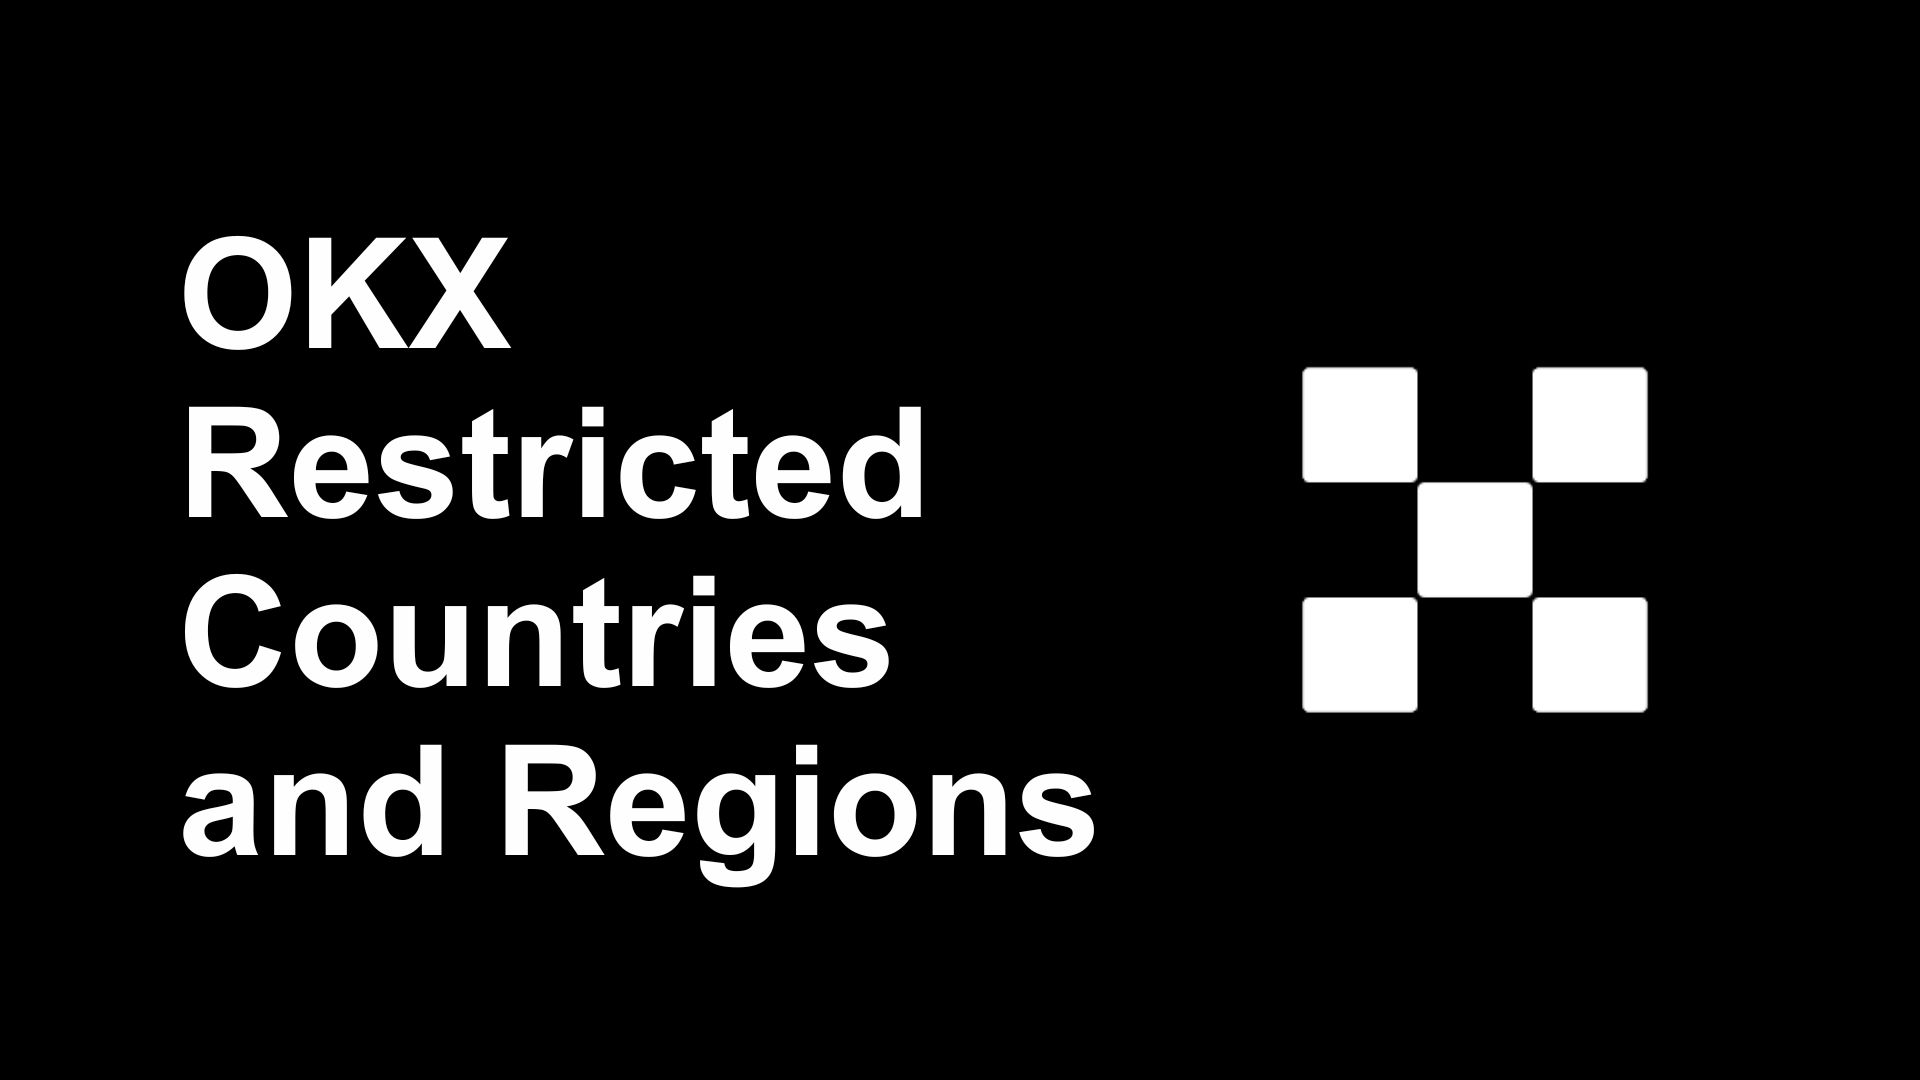 OKX Restricted Countries and Regions